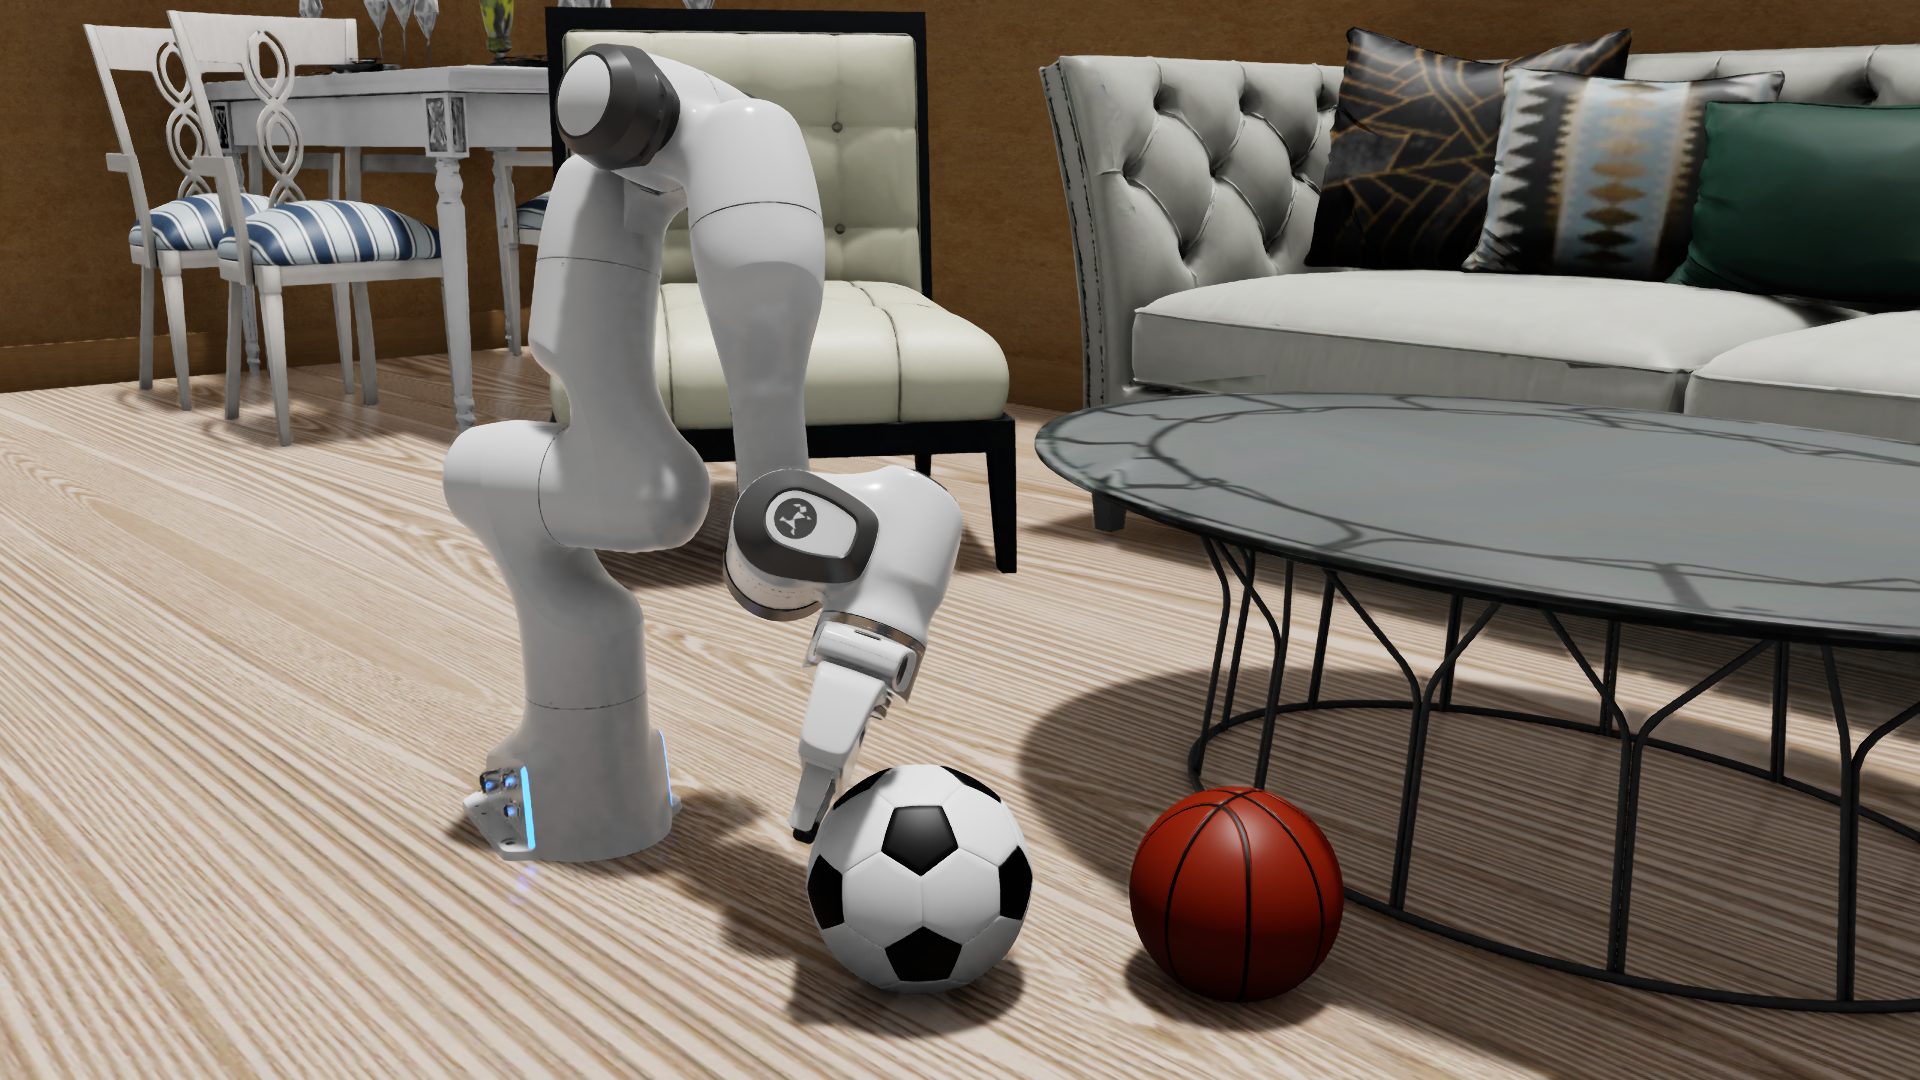 An image of the IndoorKit extension for robotics, winner of the #ExtendOmniverse contest. Image courtesy of Yizhou Zhao.